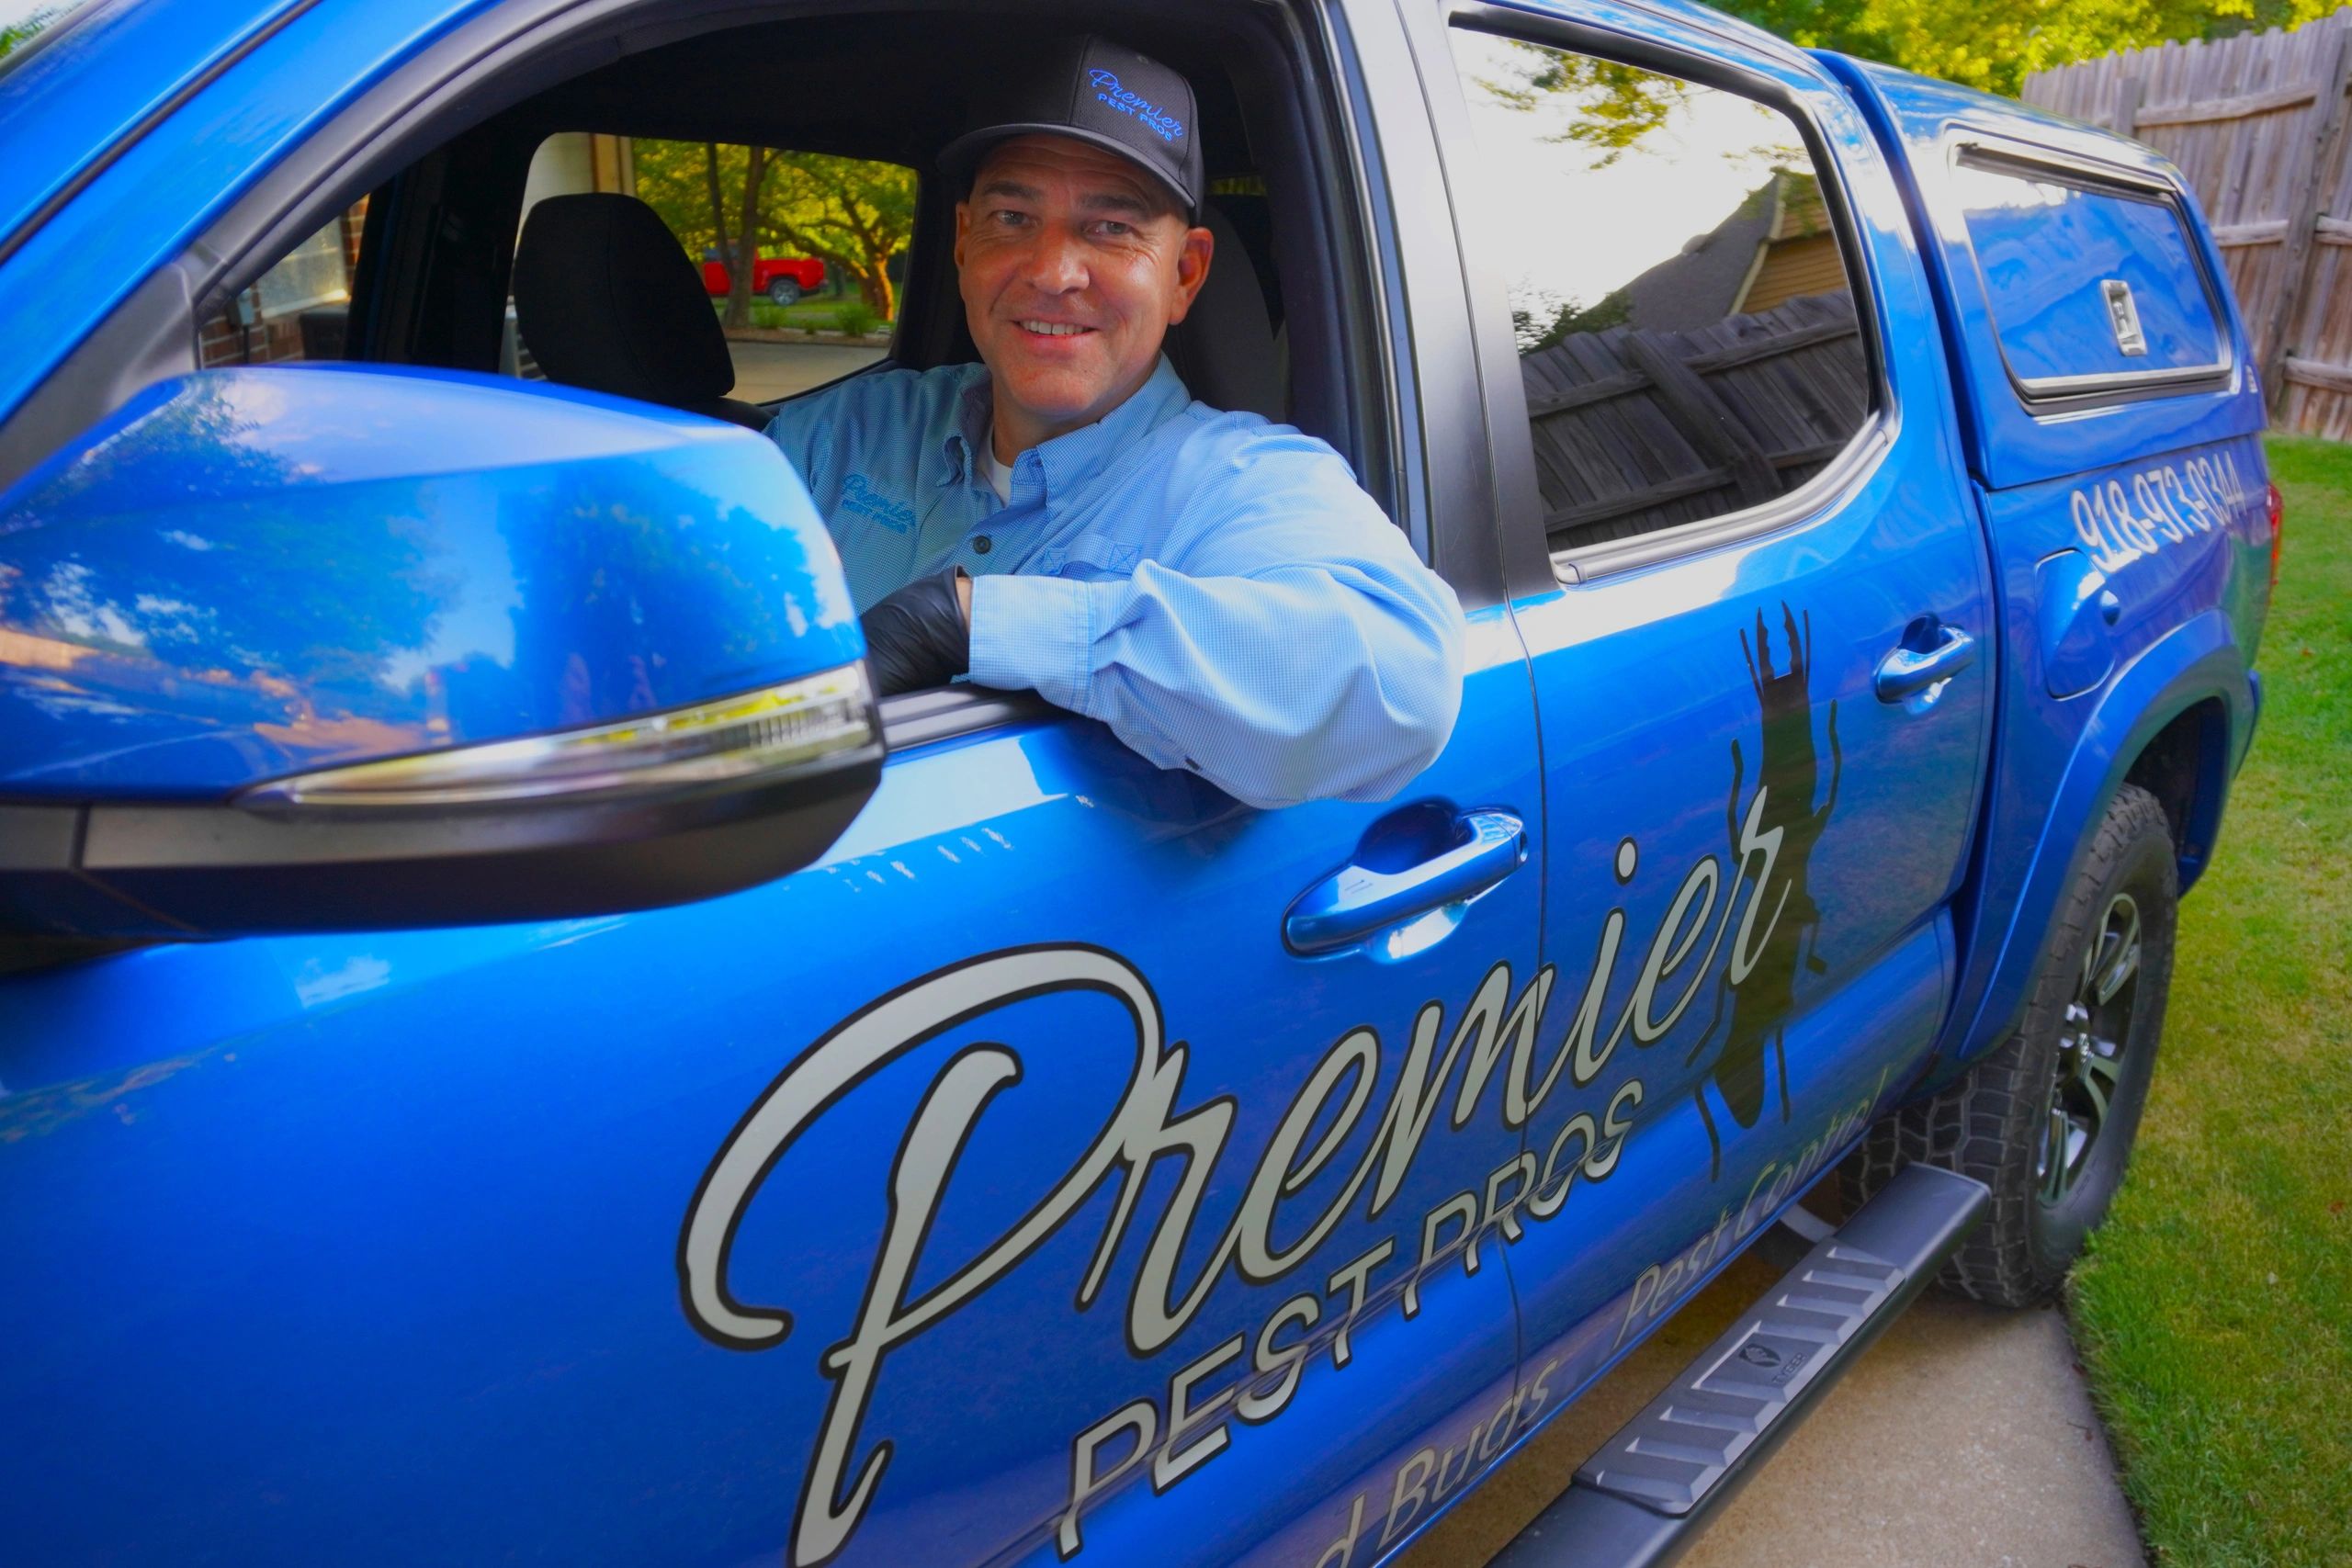 Premier Pest Pros owner in company truck ready to provide pest control services.